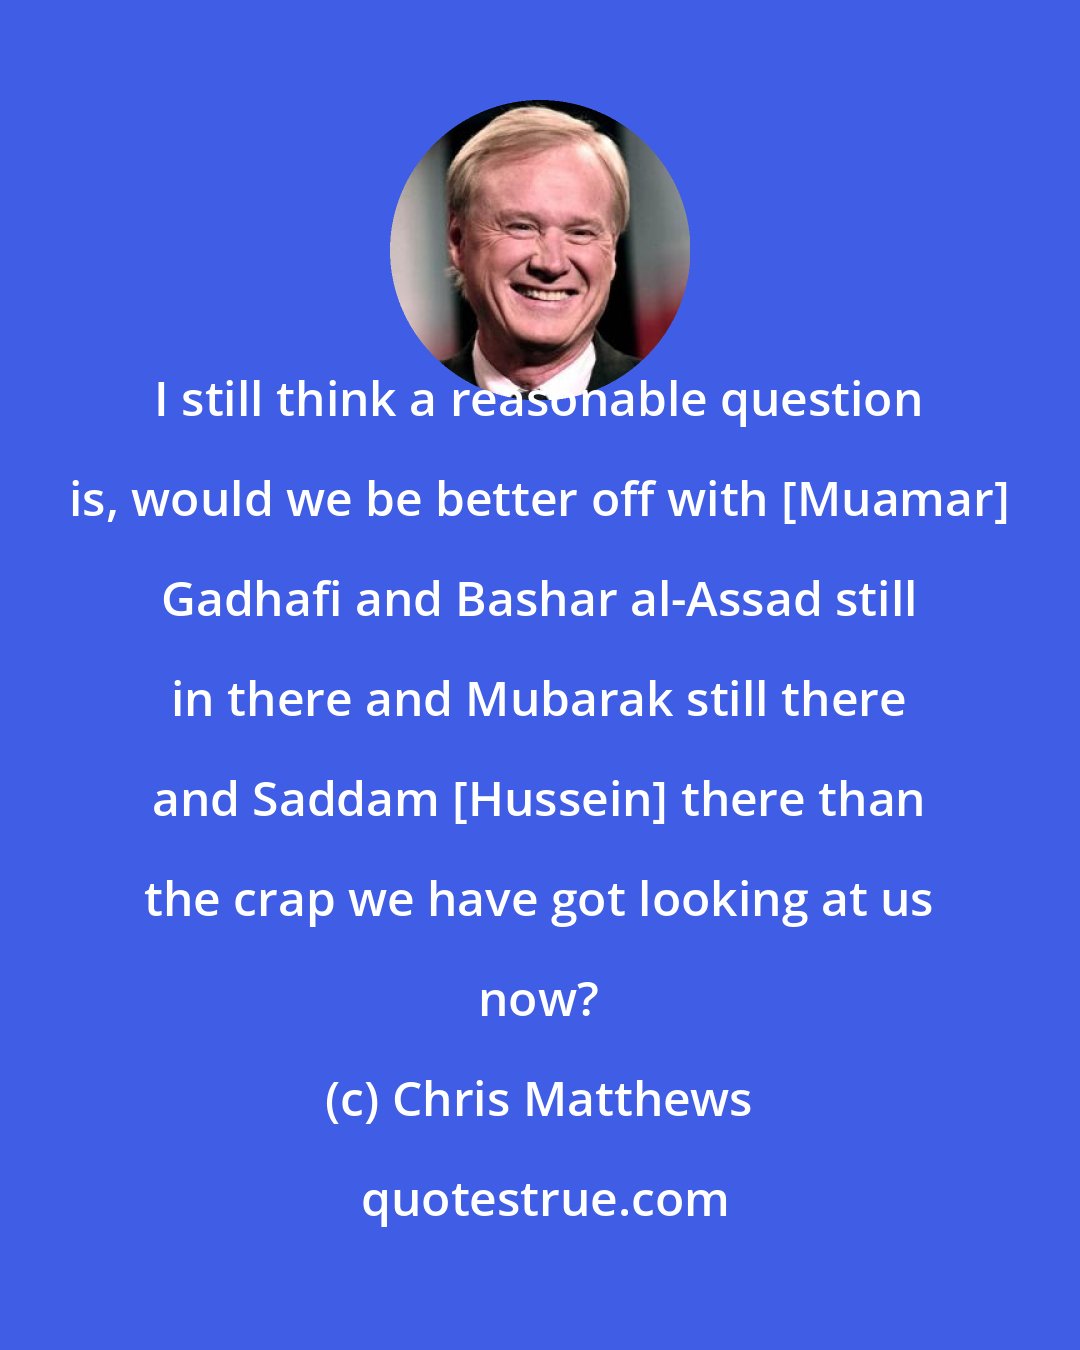 Chris Matthews: I still think a reasonable question is, would we be better off with [Muamar] Gadhafi and Bashar al-Assad still in there and Mubarak still there and Saddam [Hussein] there than the crap we have got looking at us now?